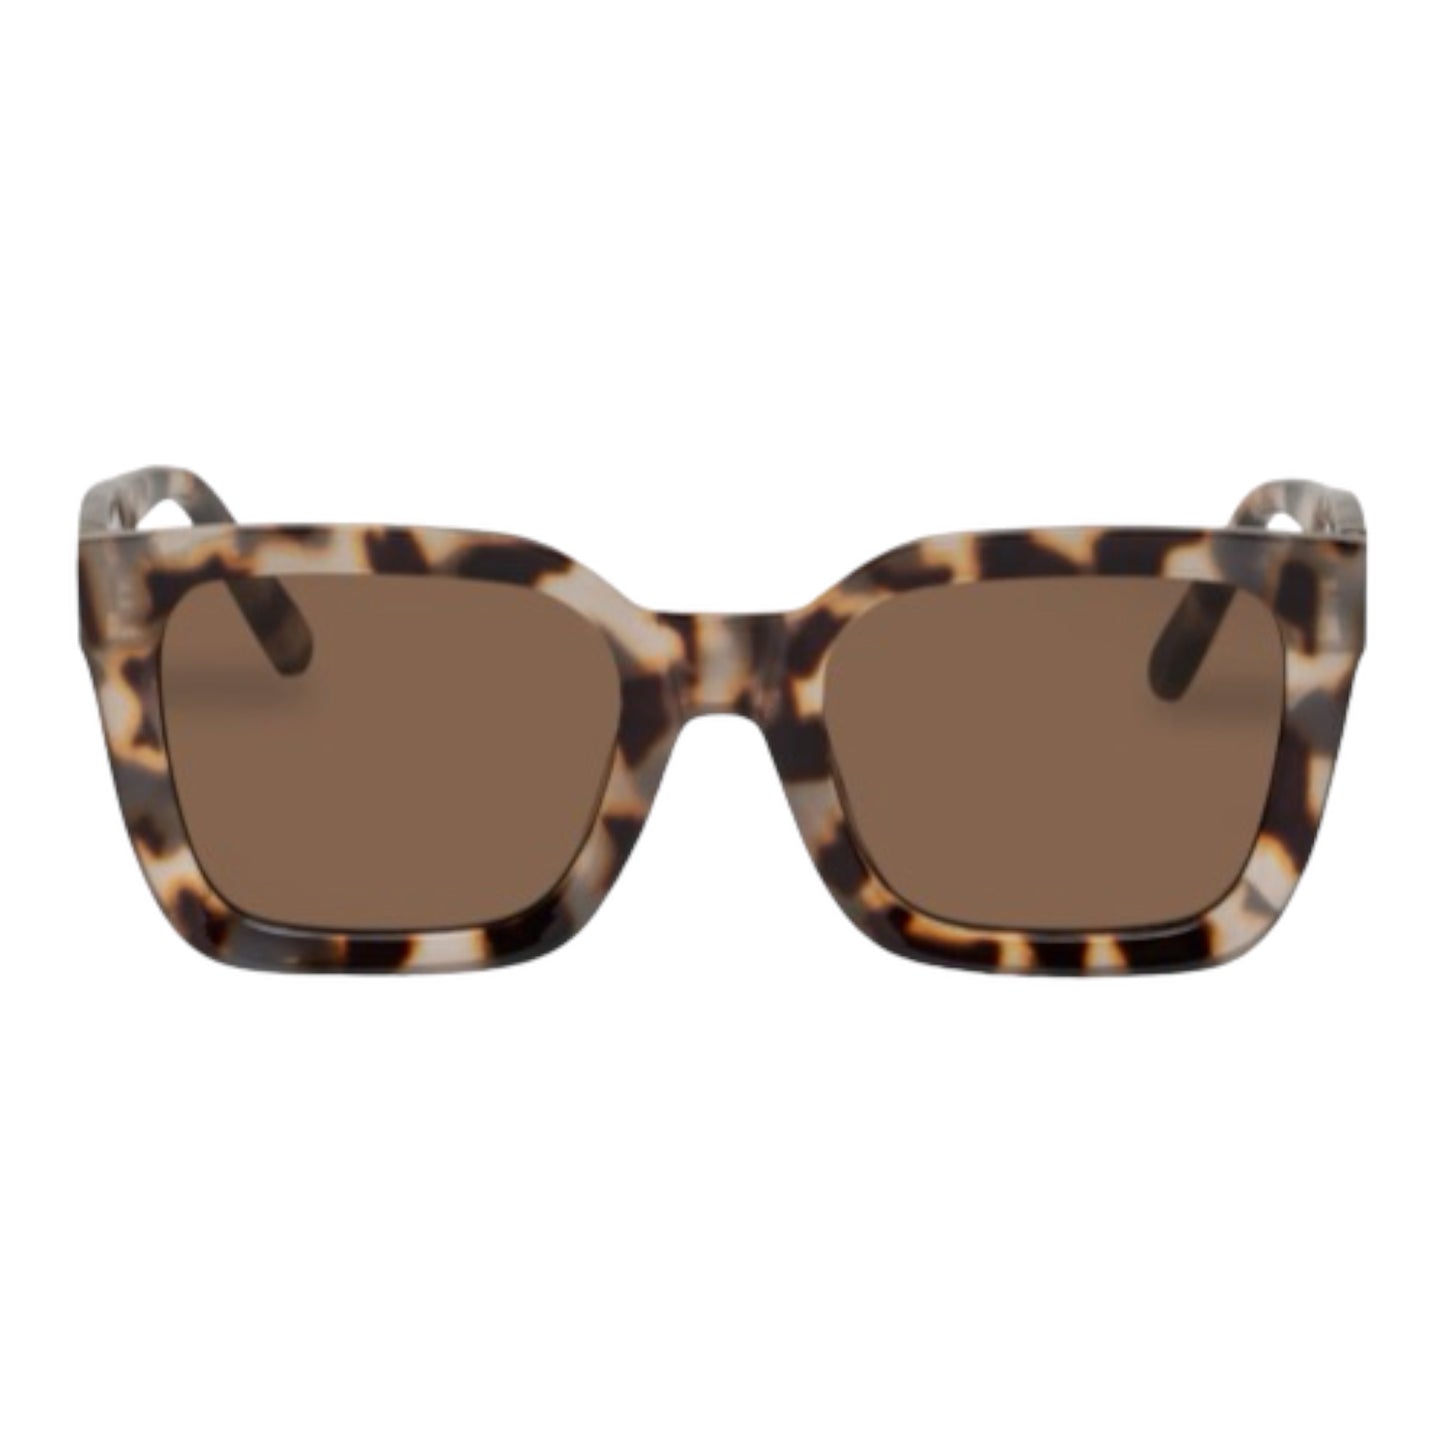 Aire Sunglasses Abstraction Sunglasses in Cookie Tart